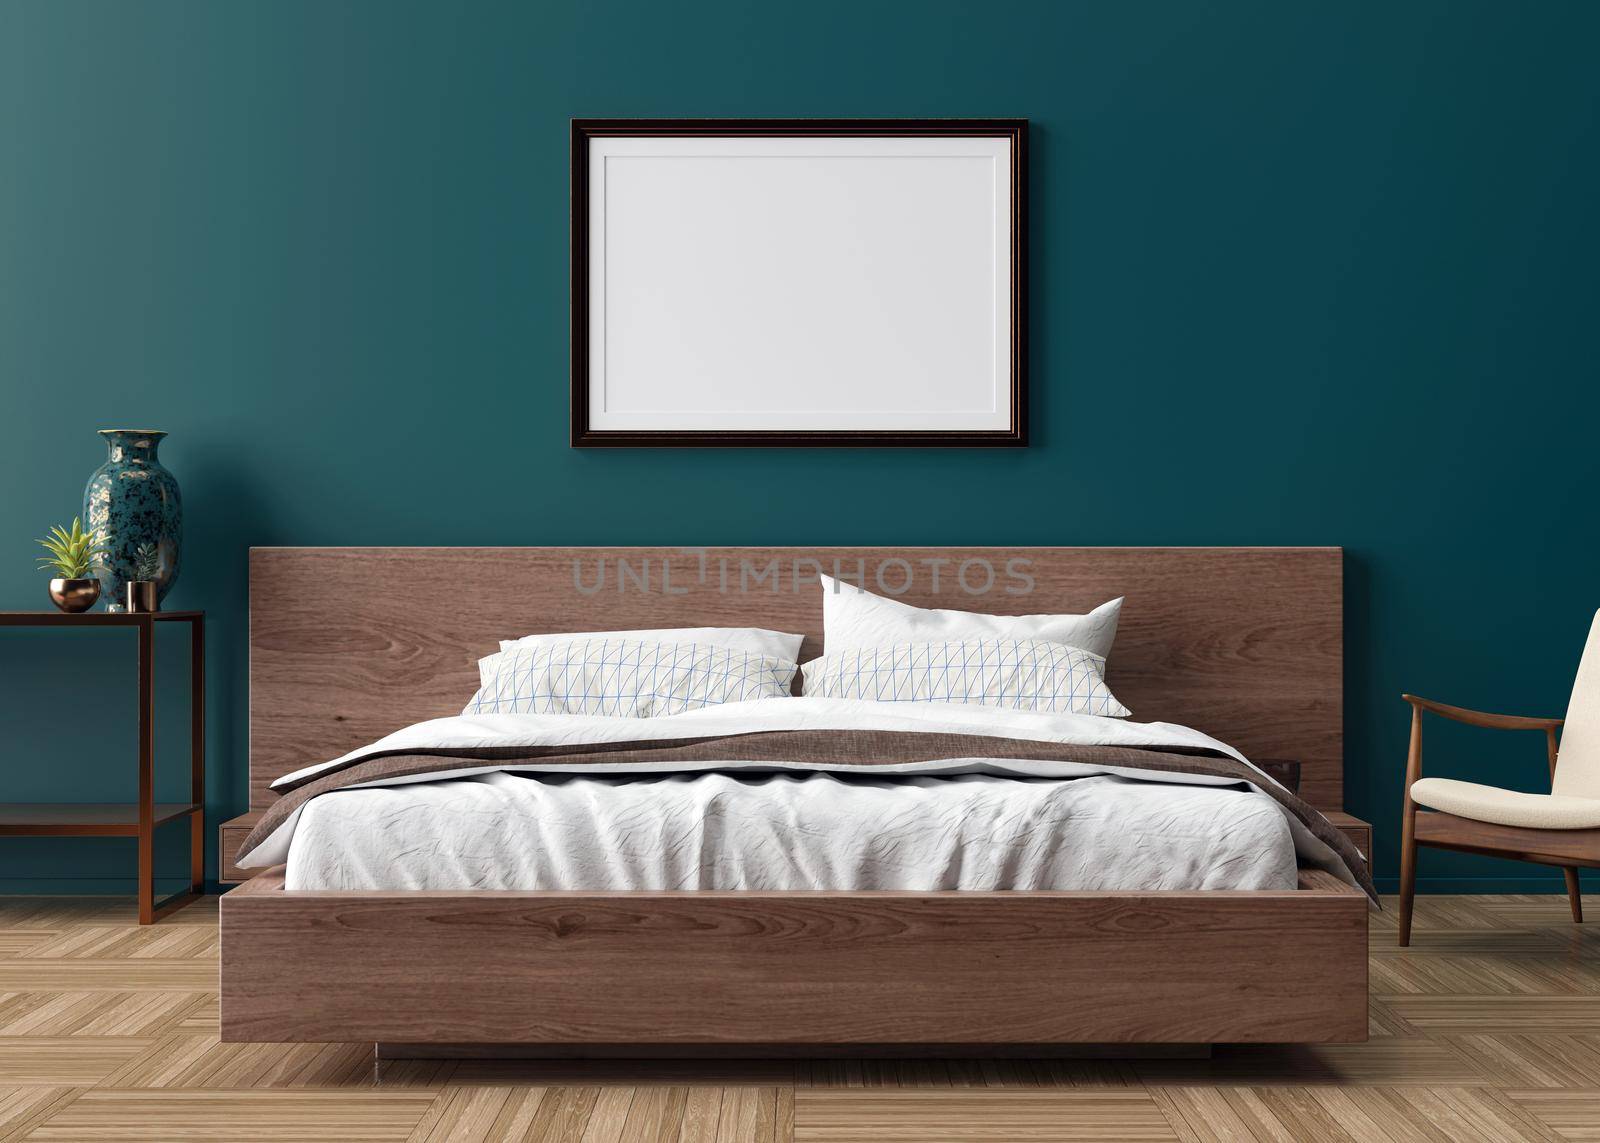 Blank picture frame on blue wall in bedroom. Mock up poster frame in modern interior. 3D render, 3D illustration. Free space, copy space for your design. Wooden bed, armchair, sideboard